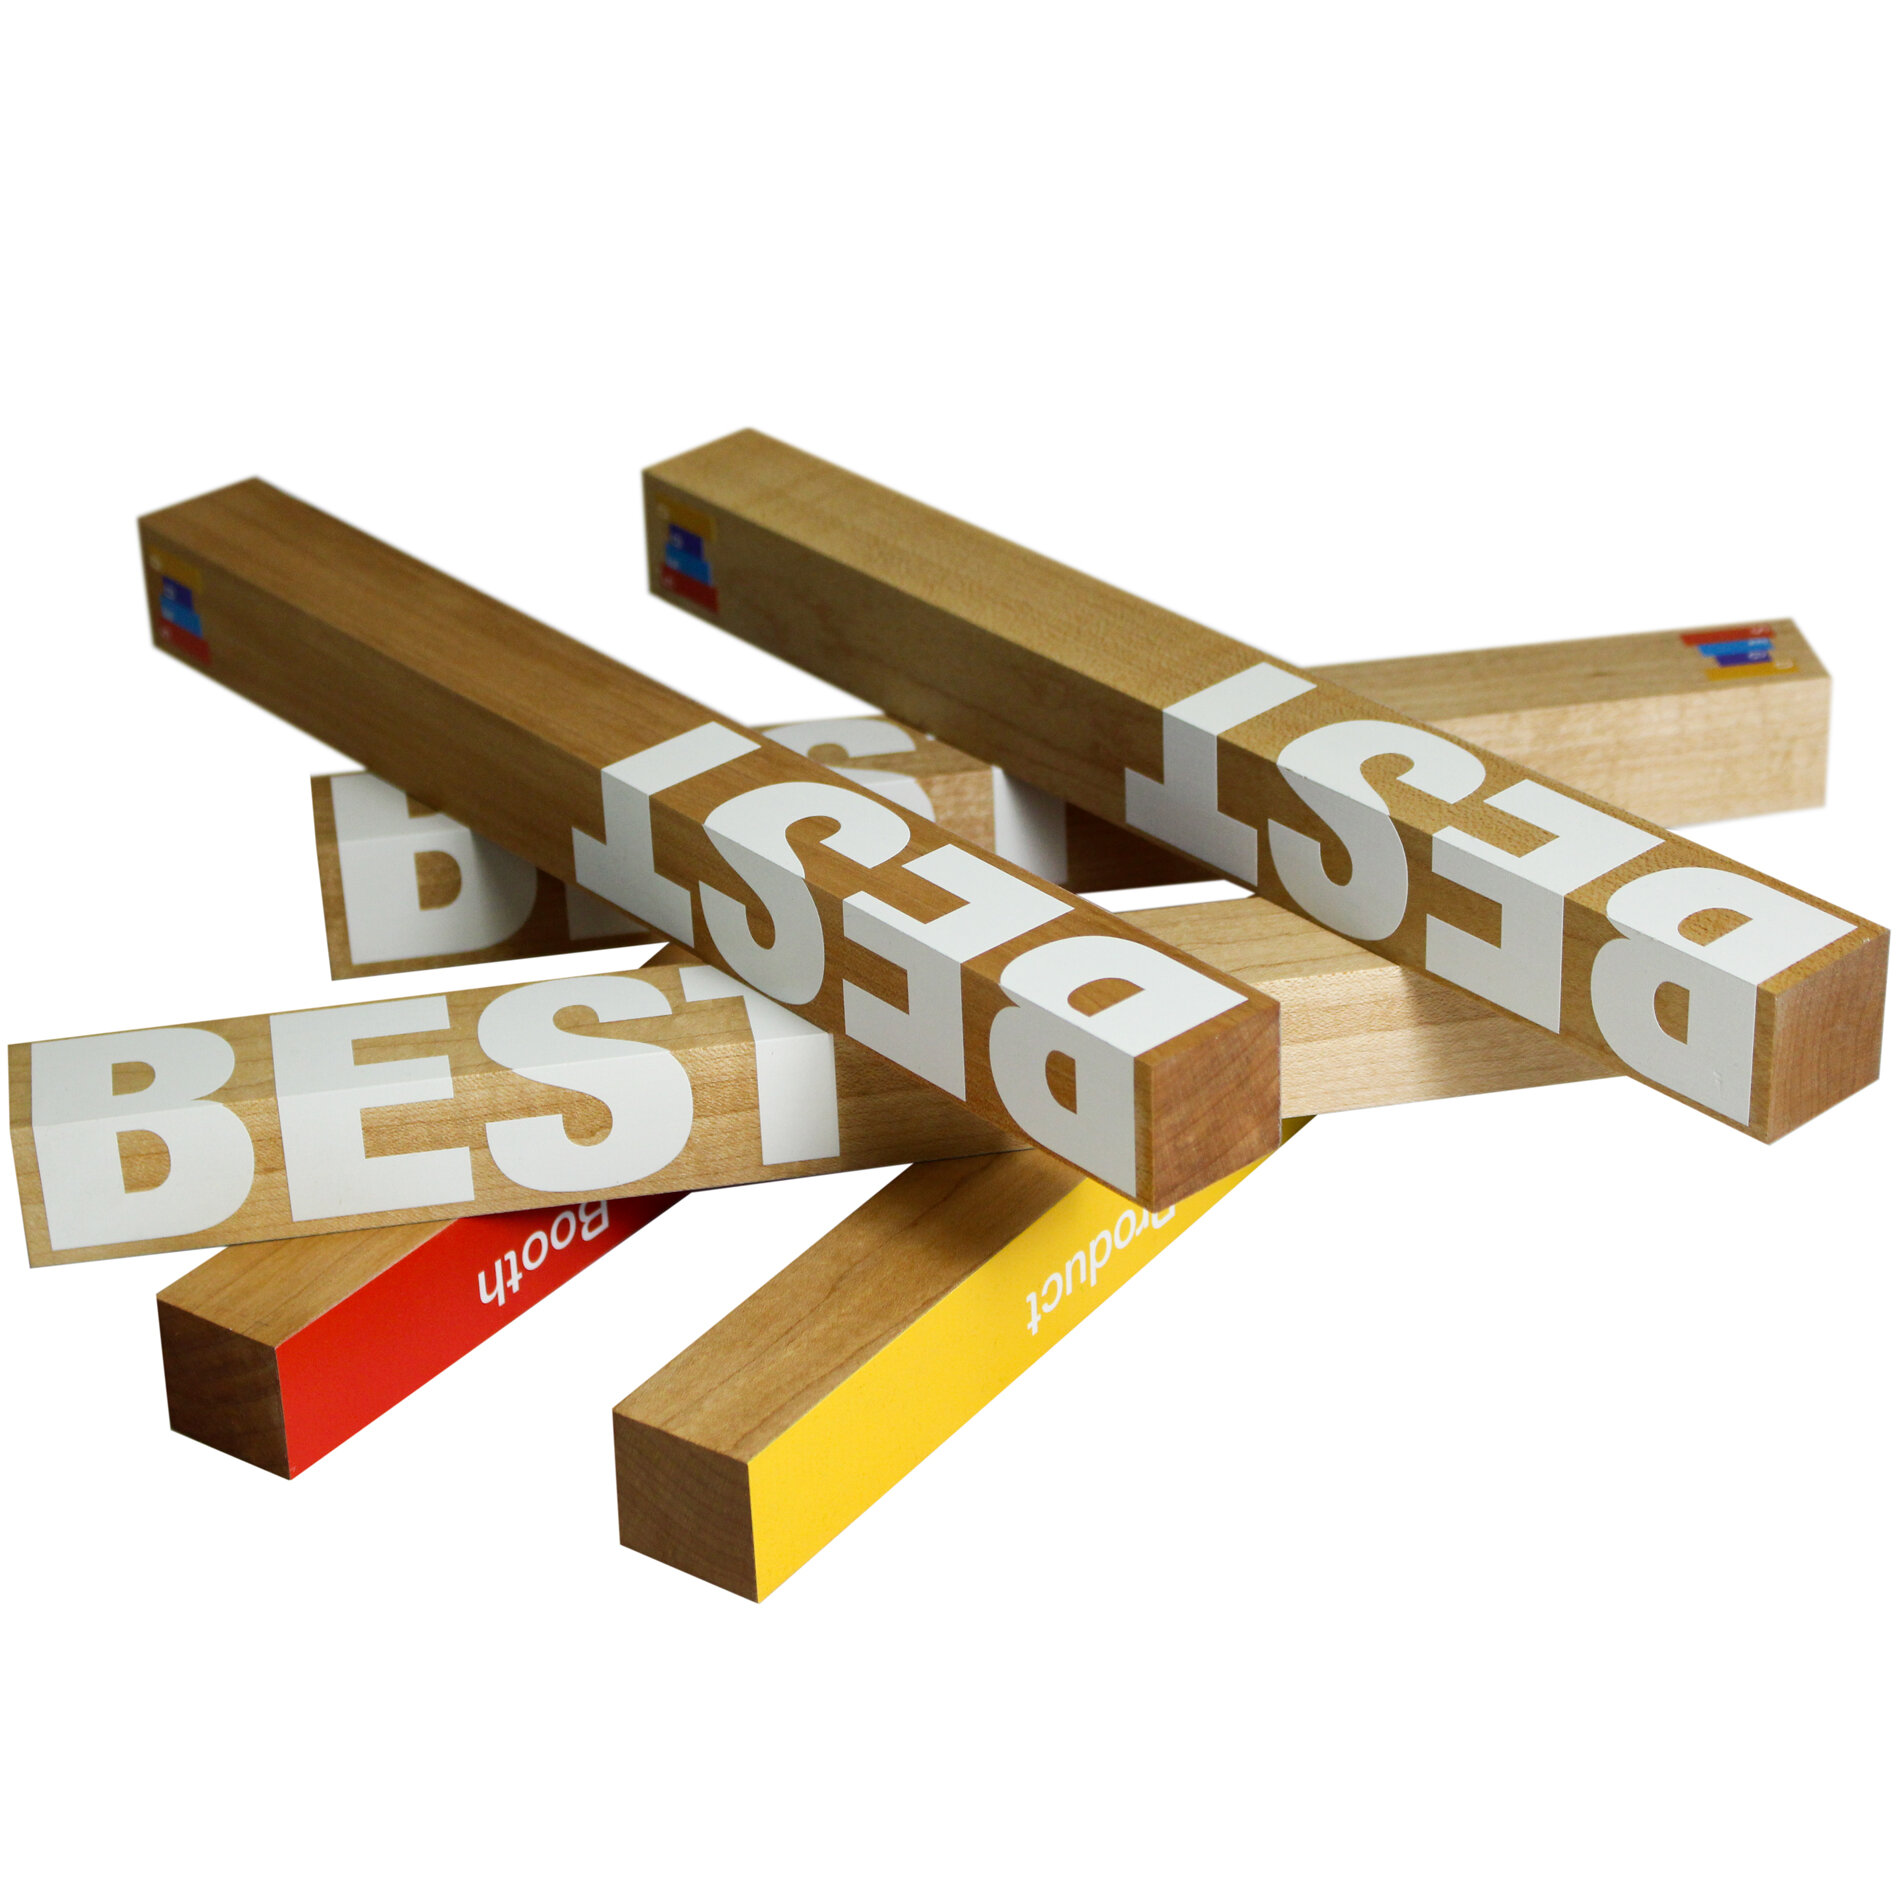 We created these custom batton style awards for the SEGD annual conference awards banquet. The awards were being given for the best supplier booth at the event. 